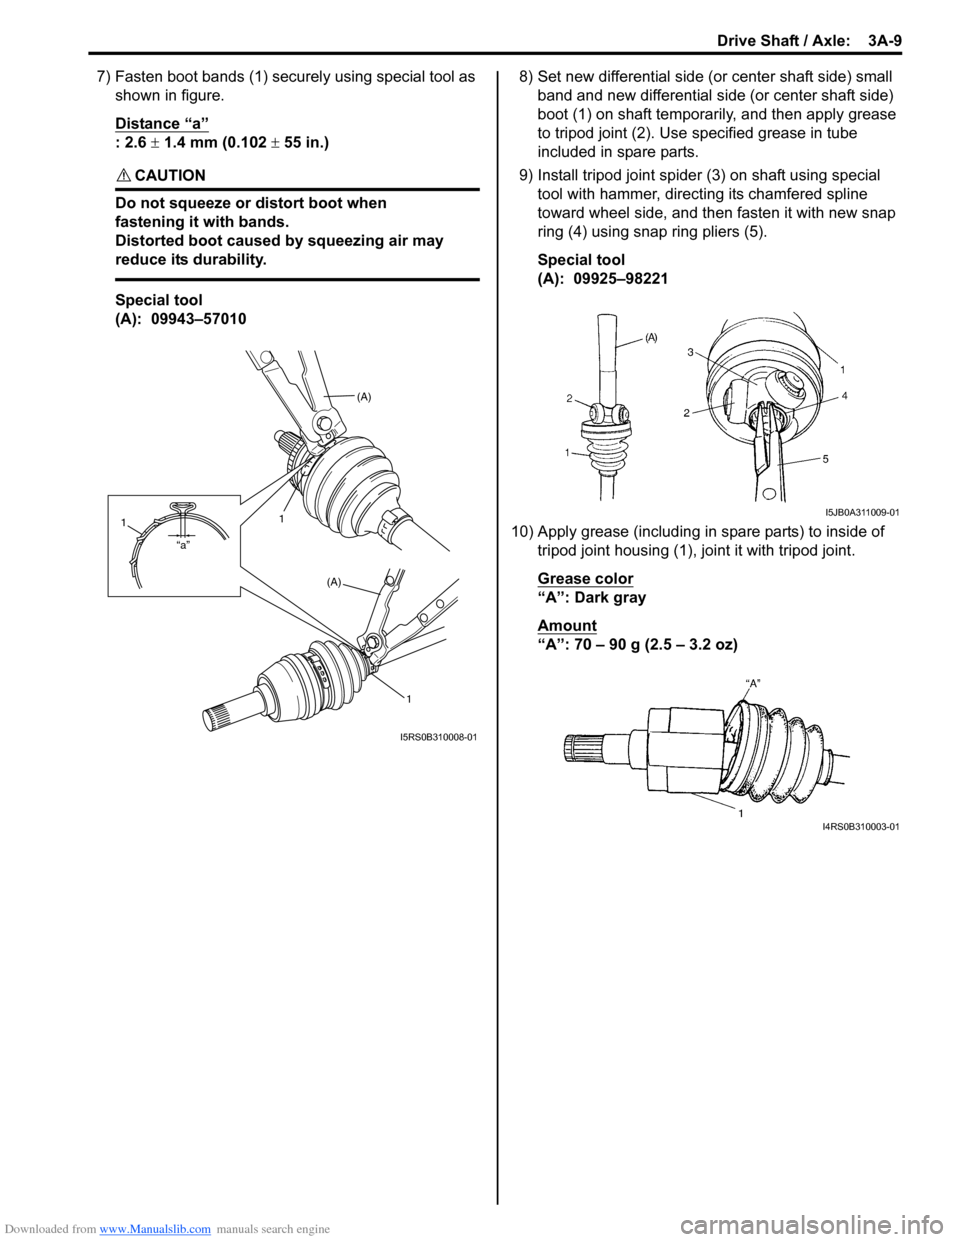 SUZUKI SWIFT 2007 2.G Service Workshop Manual Downloaded from www.Manualslib.com manuals search engine Drive Shaft / Axle:  3A-9
7) Fasten boot bands (1) securely using special tool as 
shown in figure.
Distance “a”
: 2.6 ±  1.4 mm (0.102 ±